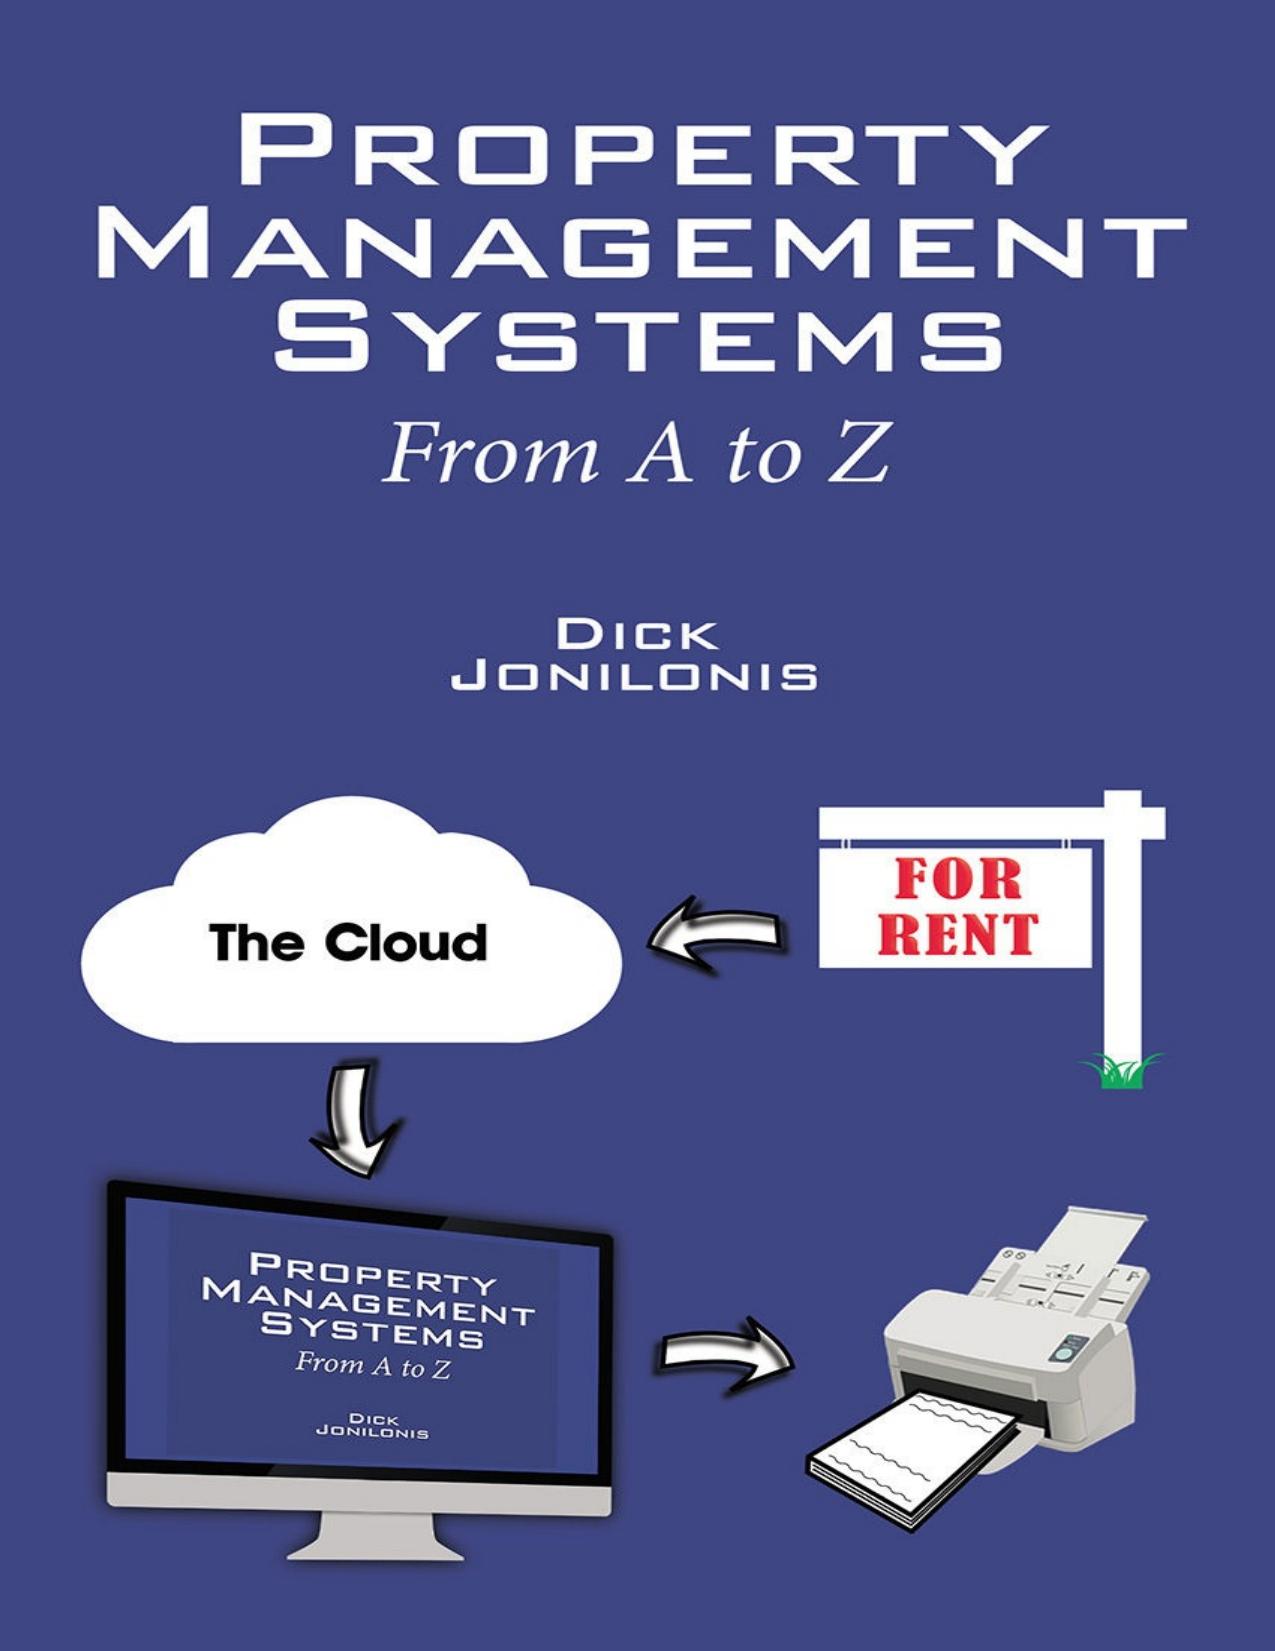 Property Management Systems: From A to Z - PDFDrive.com